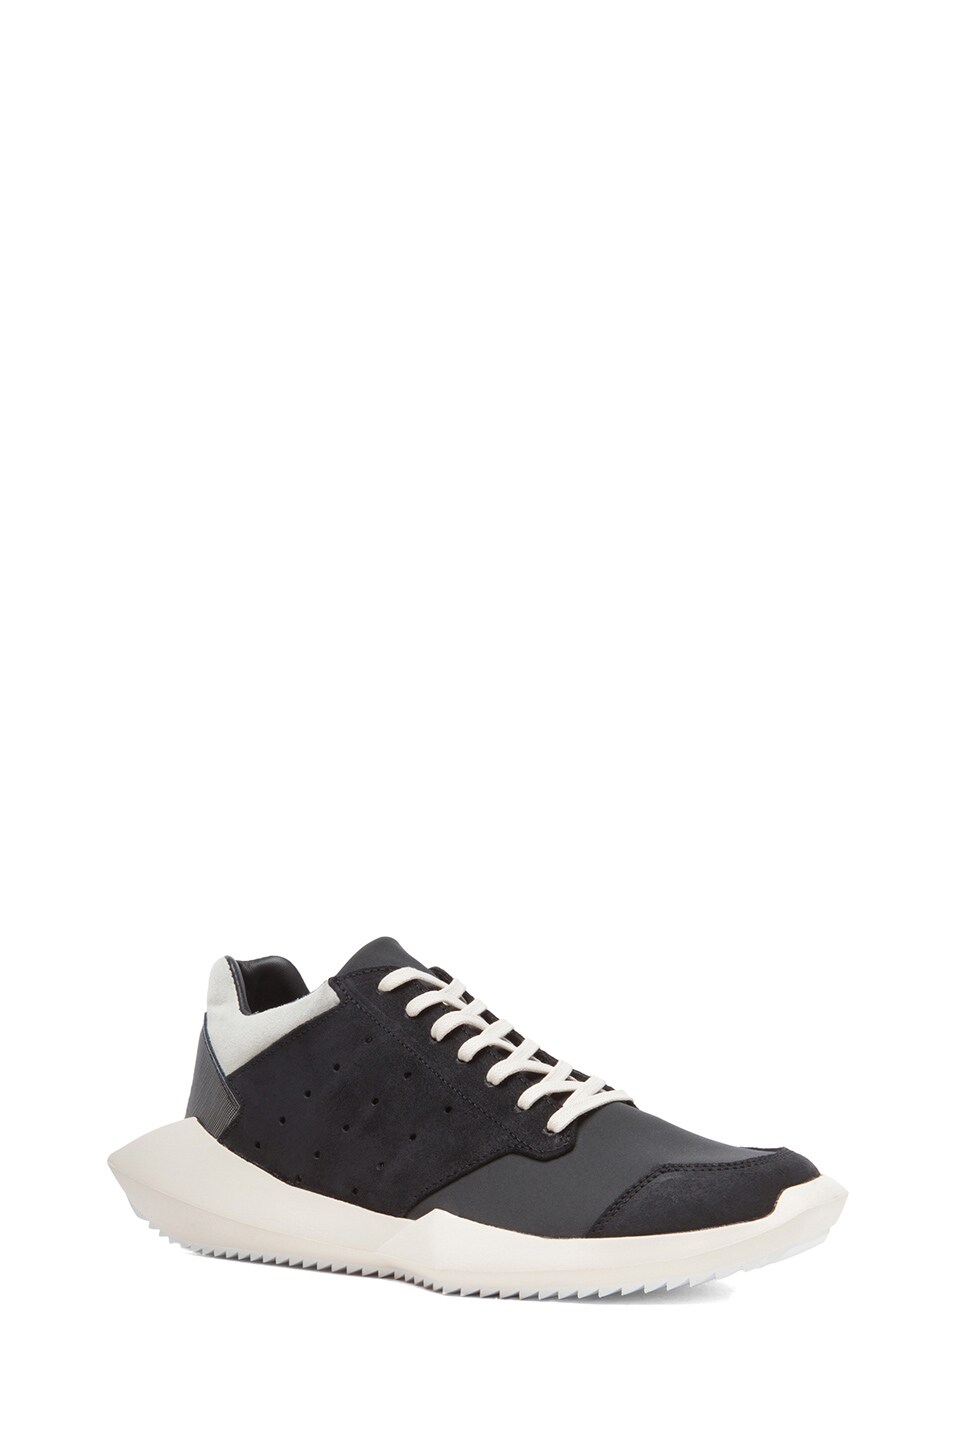 Image 1 of Rick Owens x Adidas Leather & Suede Trainers in Black & White